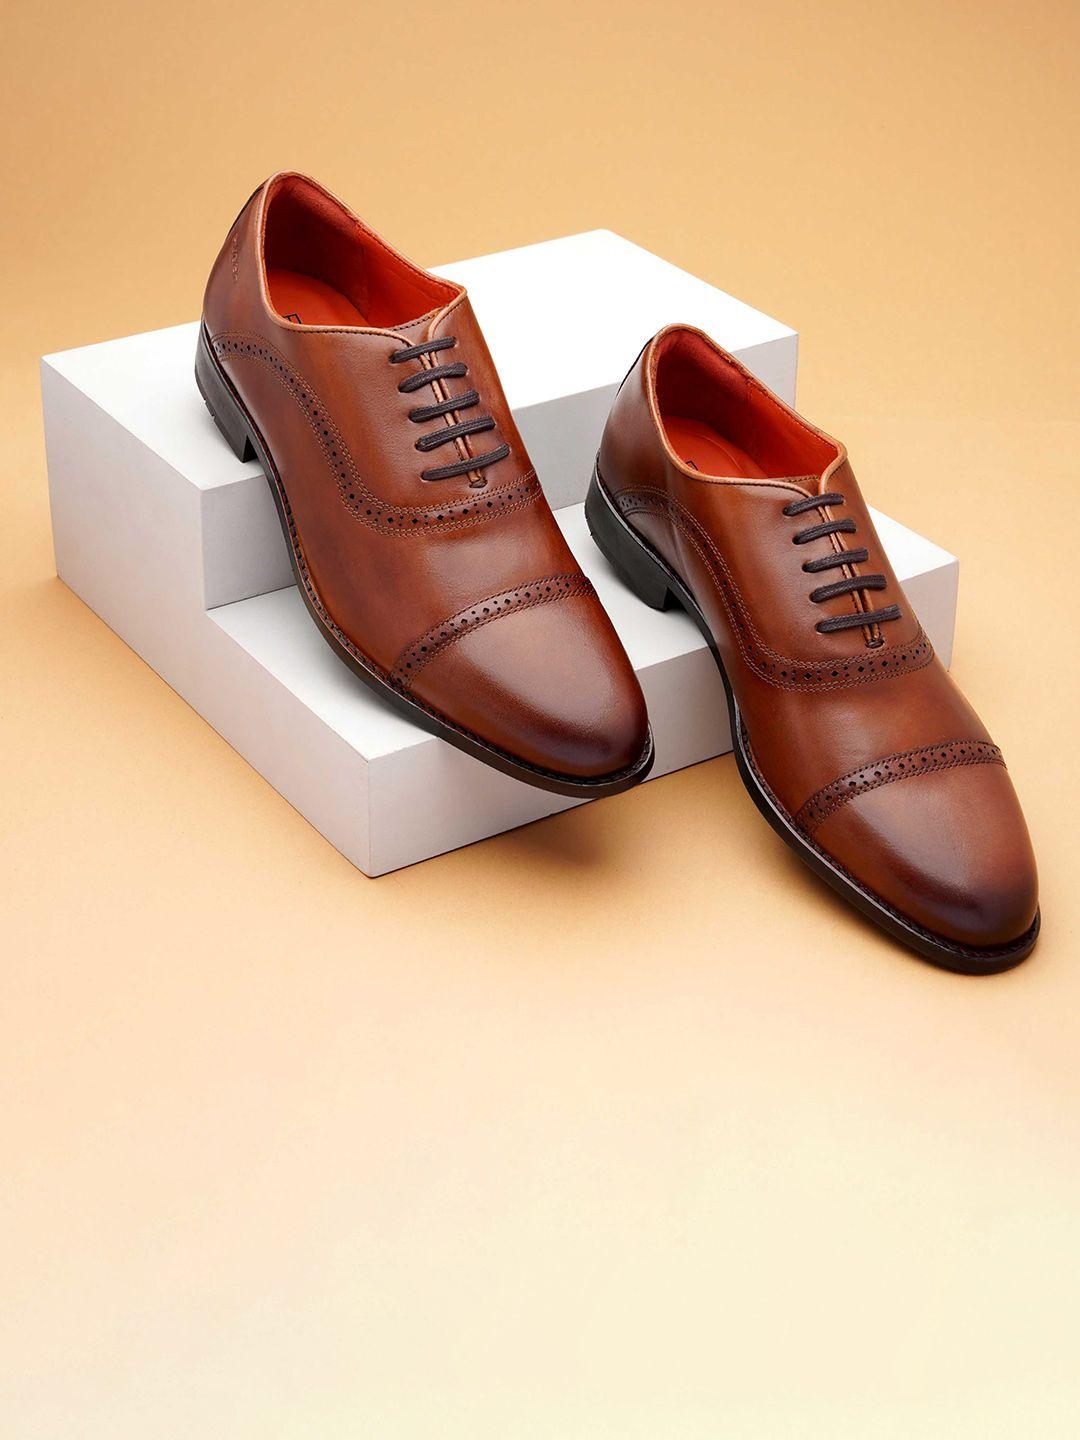 ruosh-men-perforated-leather-formal-oxfords